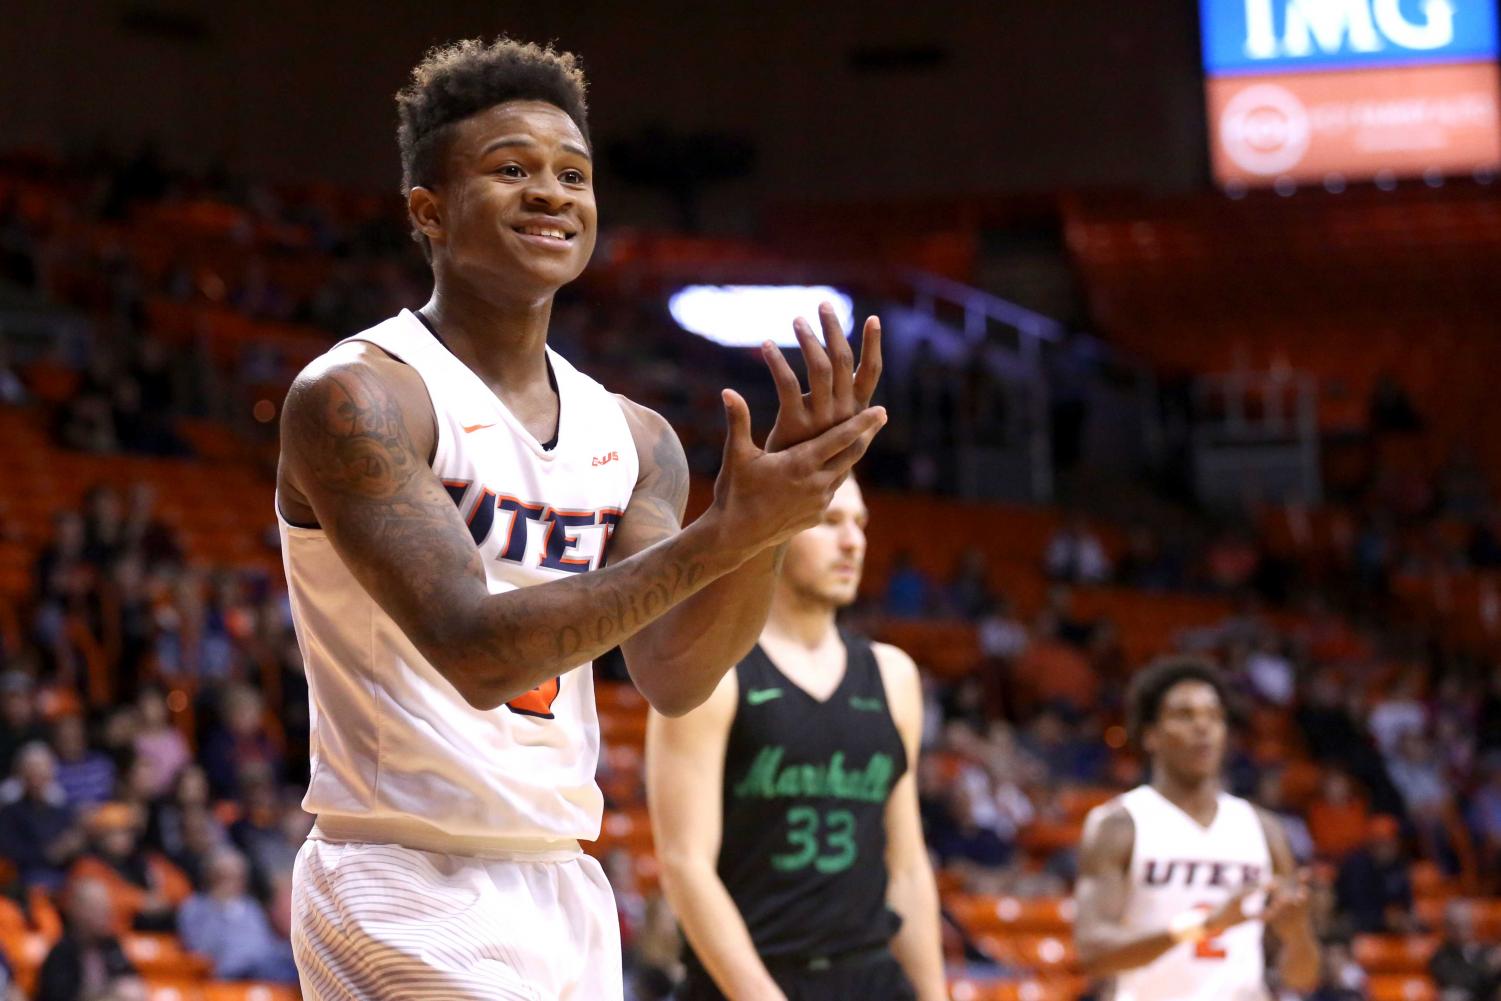 Thundering+Herd+pull+away+late+for+first-ever+win+at+UTEP